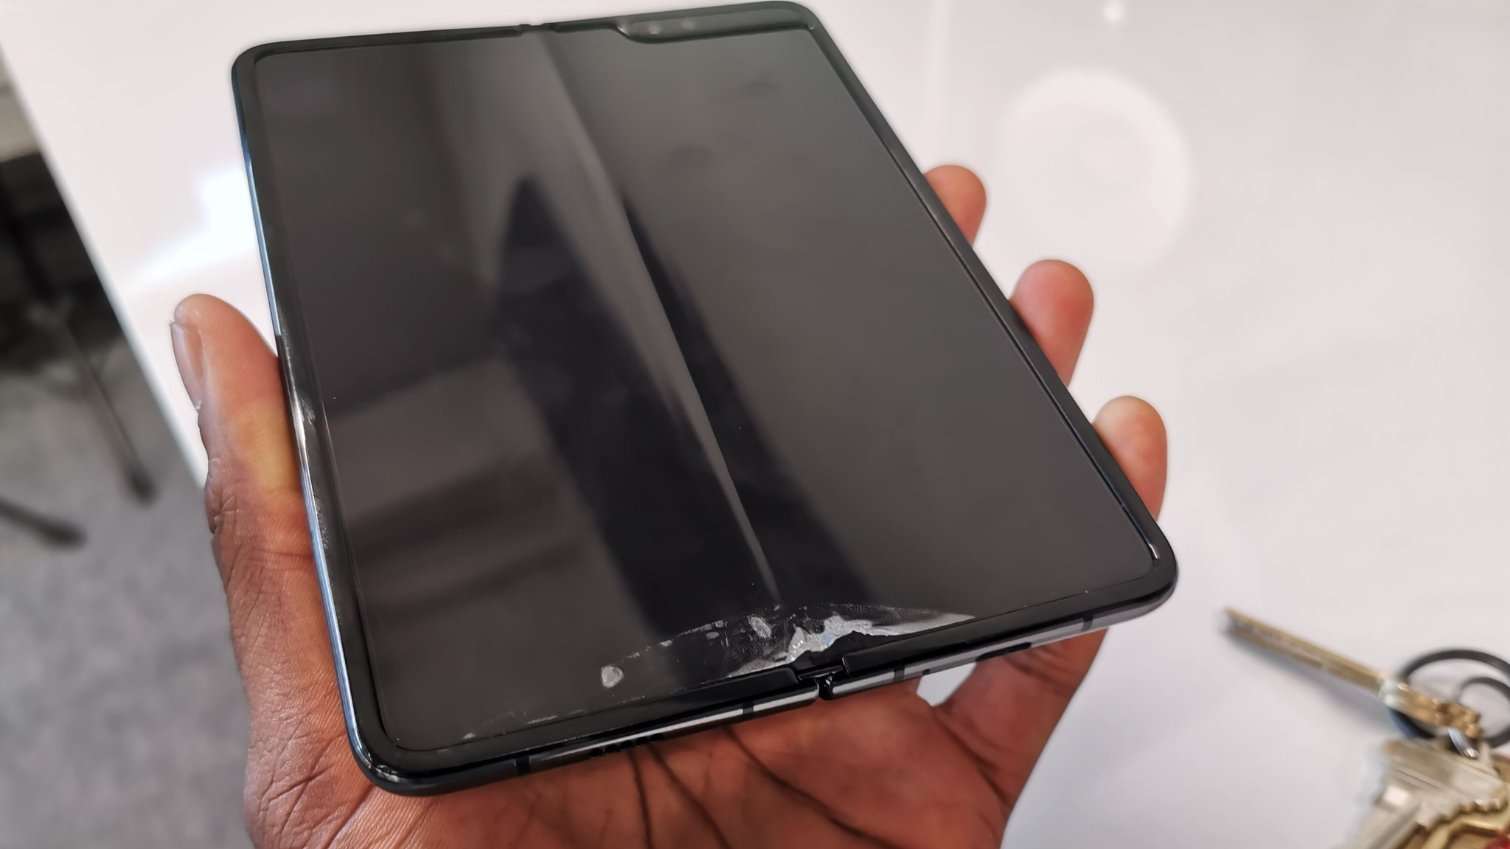 image for The $2,000 Galaxy Fold’s Screen Is Already Breaking; Samsung Responds